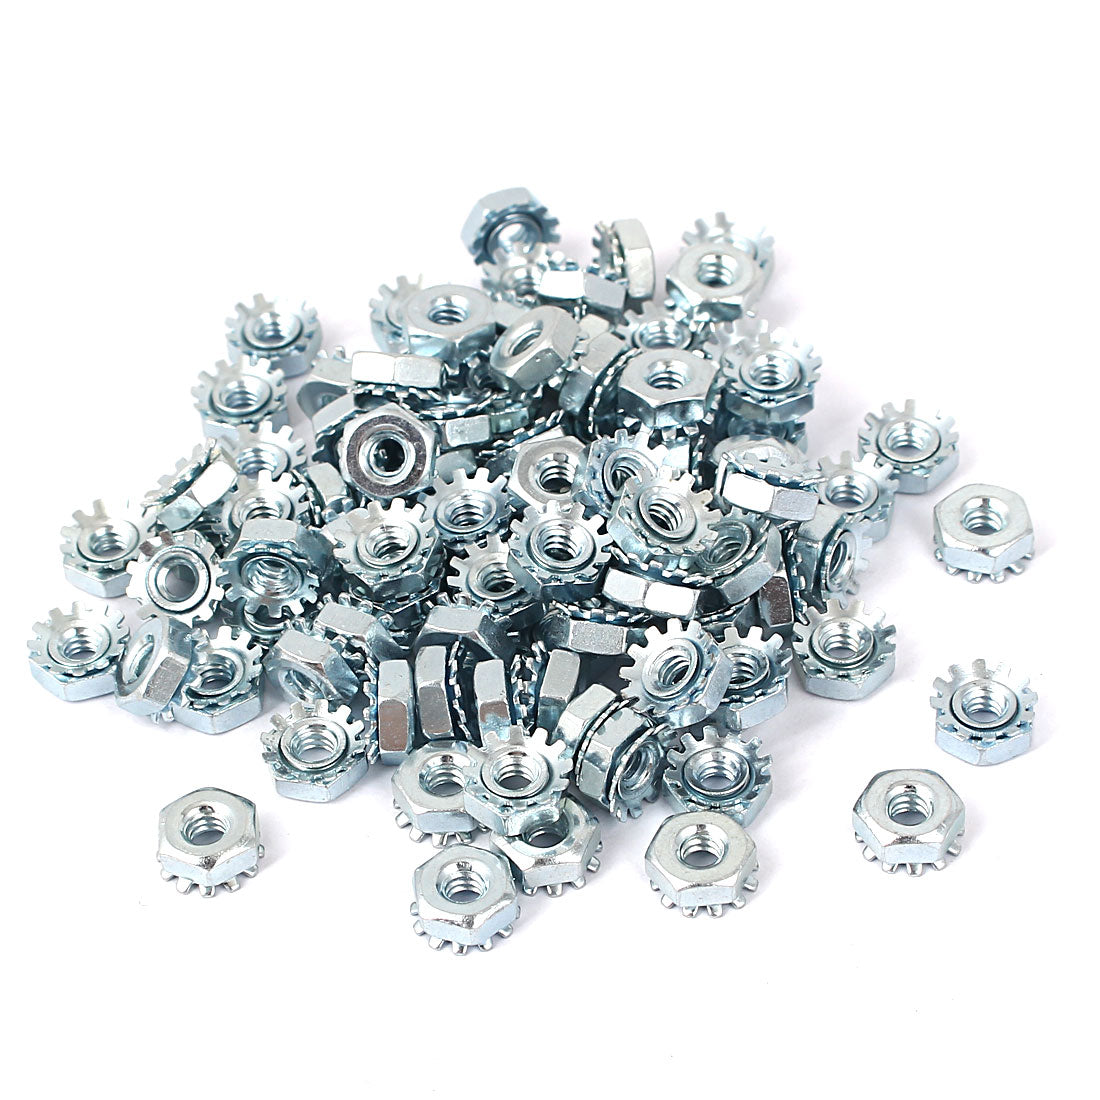 uxcell Uxcell 6#-32 Female Thread Zinc Plated Kep Hex Star Lock Nut 100pcs